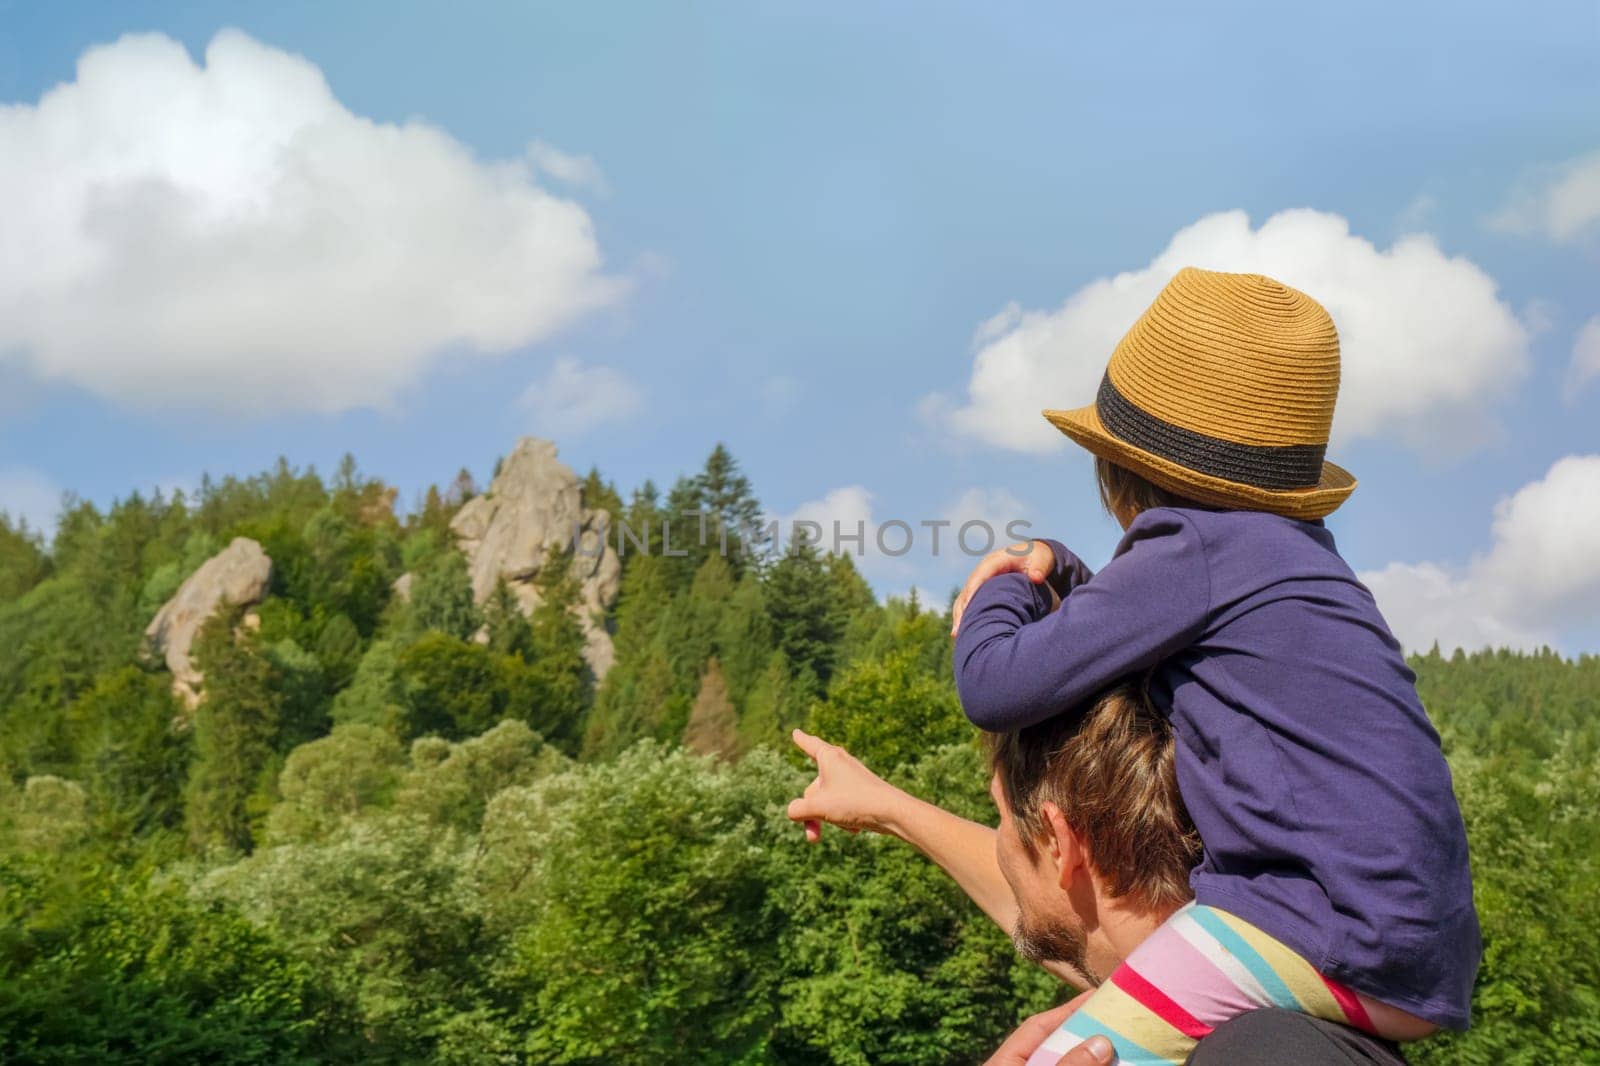 Nature kid on shoulders dad walking hiking adventure kid dad shoulder ride. Nature child on shoulders father walking nature hiking children mountain kid hiking forest walk child adventure forest park by synel